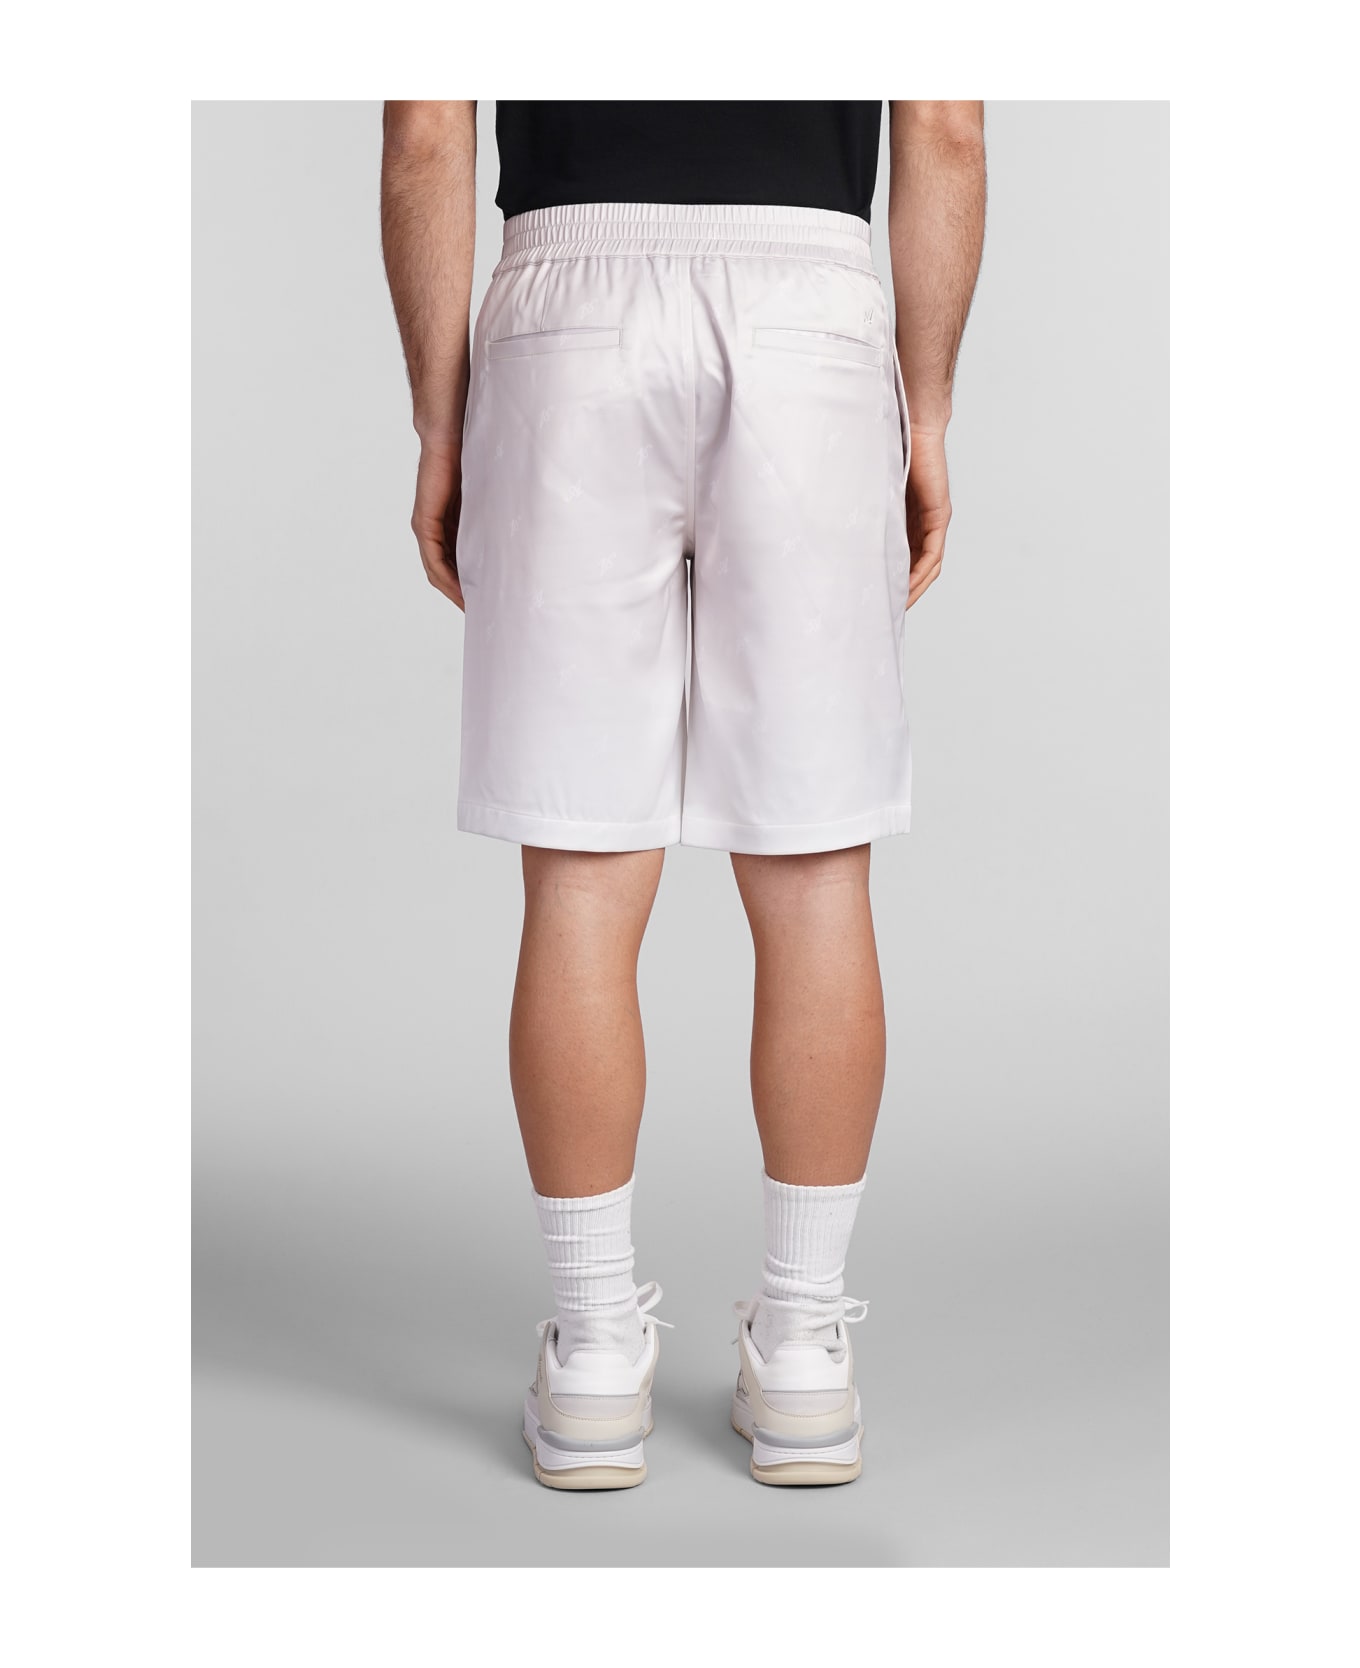 Axel Arigato Shorts In Beige Polyester - beige ショートパンツ